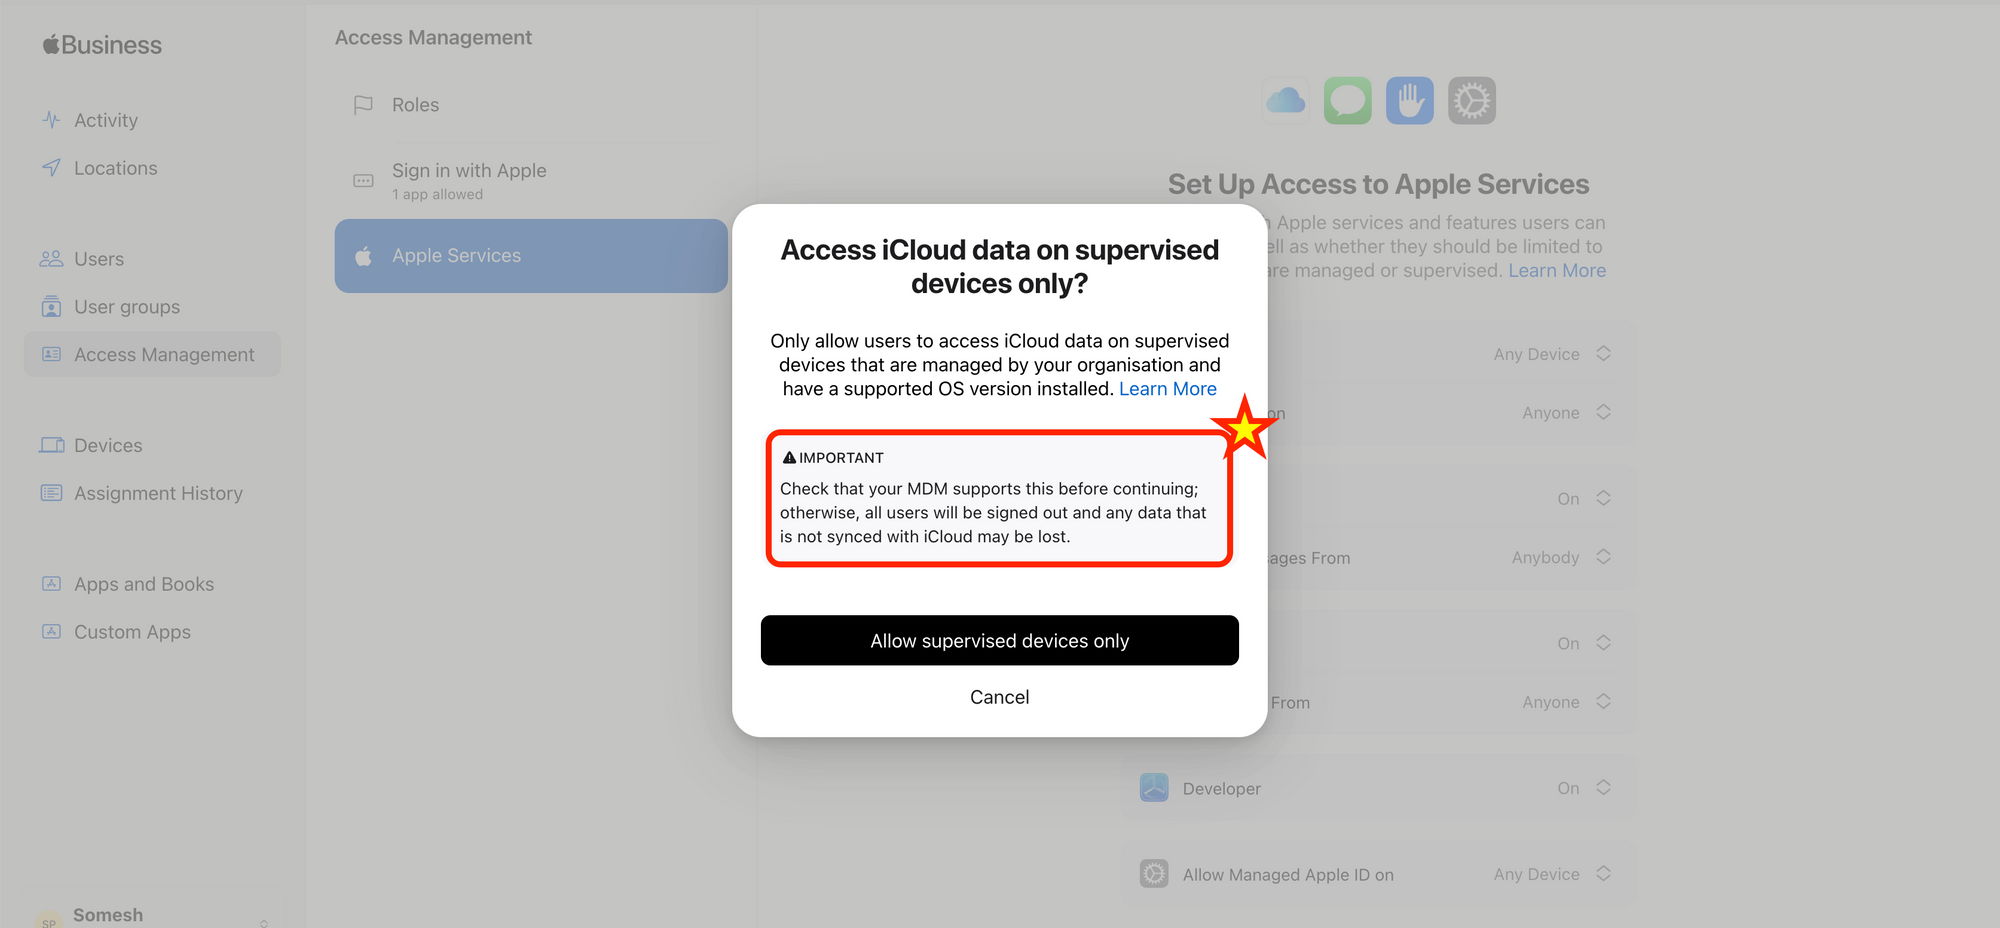 Extending Access Management for Apple Services: Beyond Federated Authentication